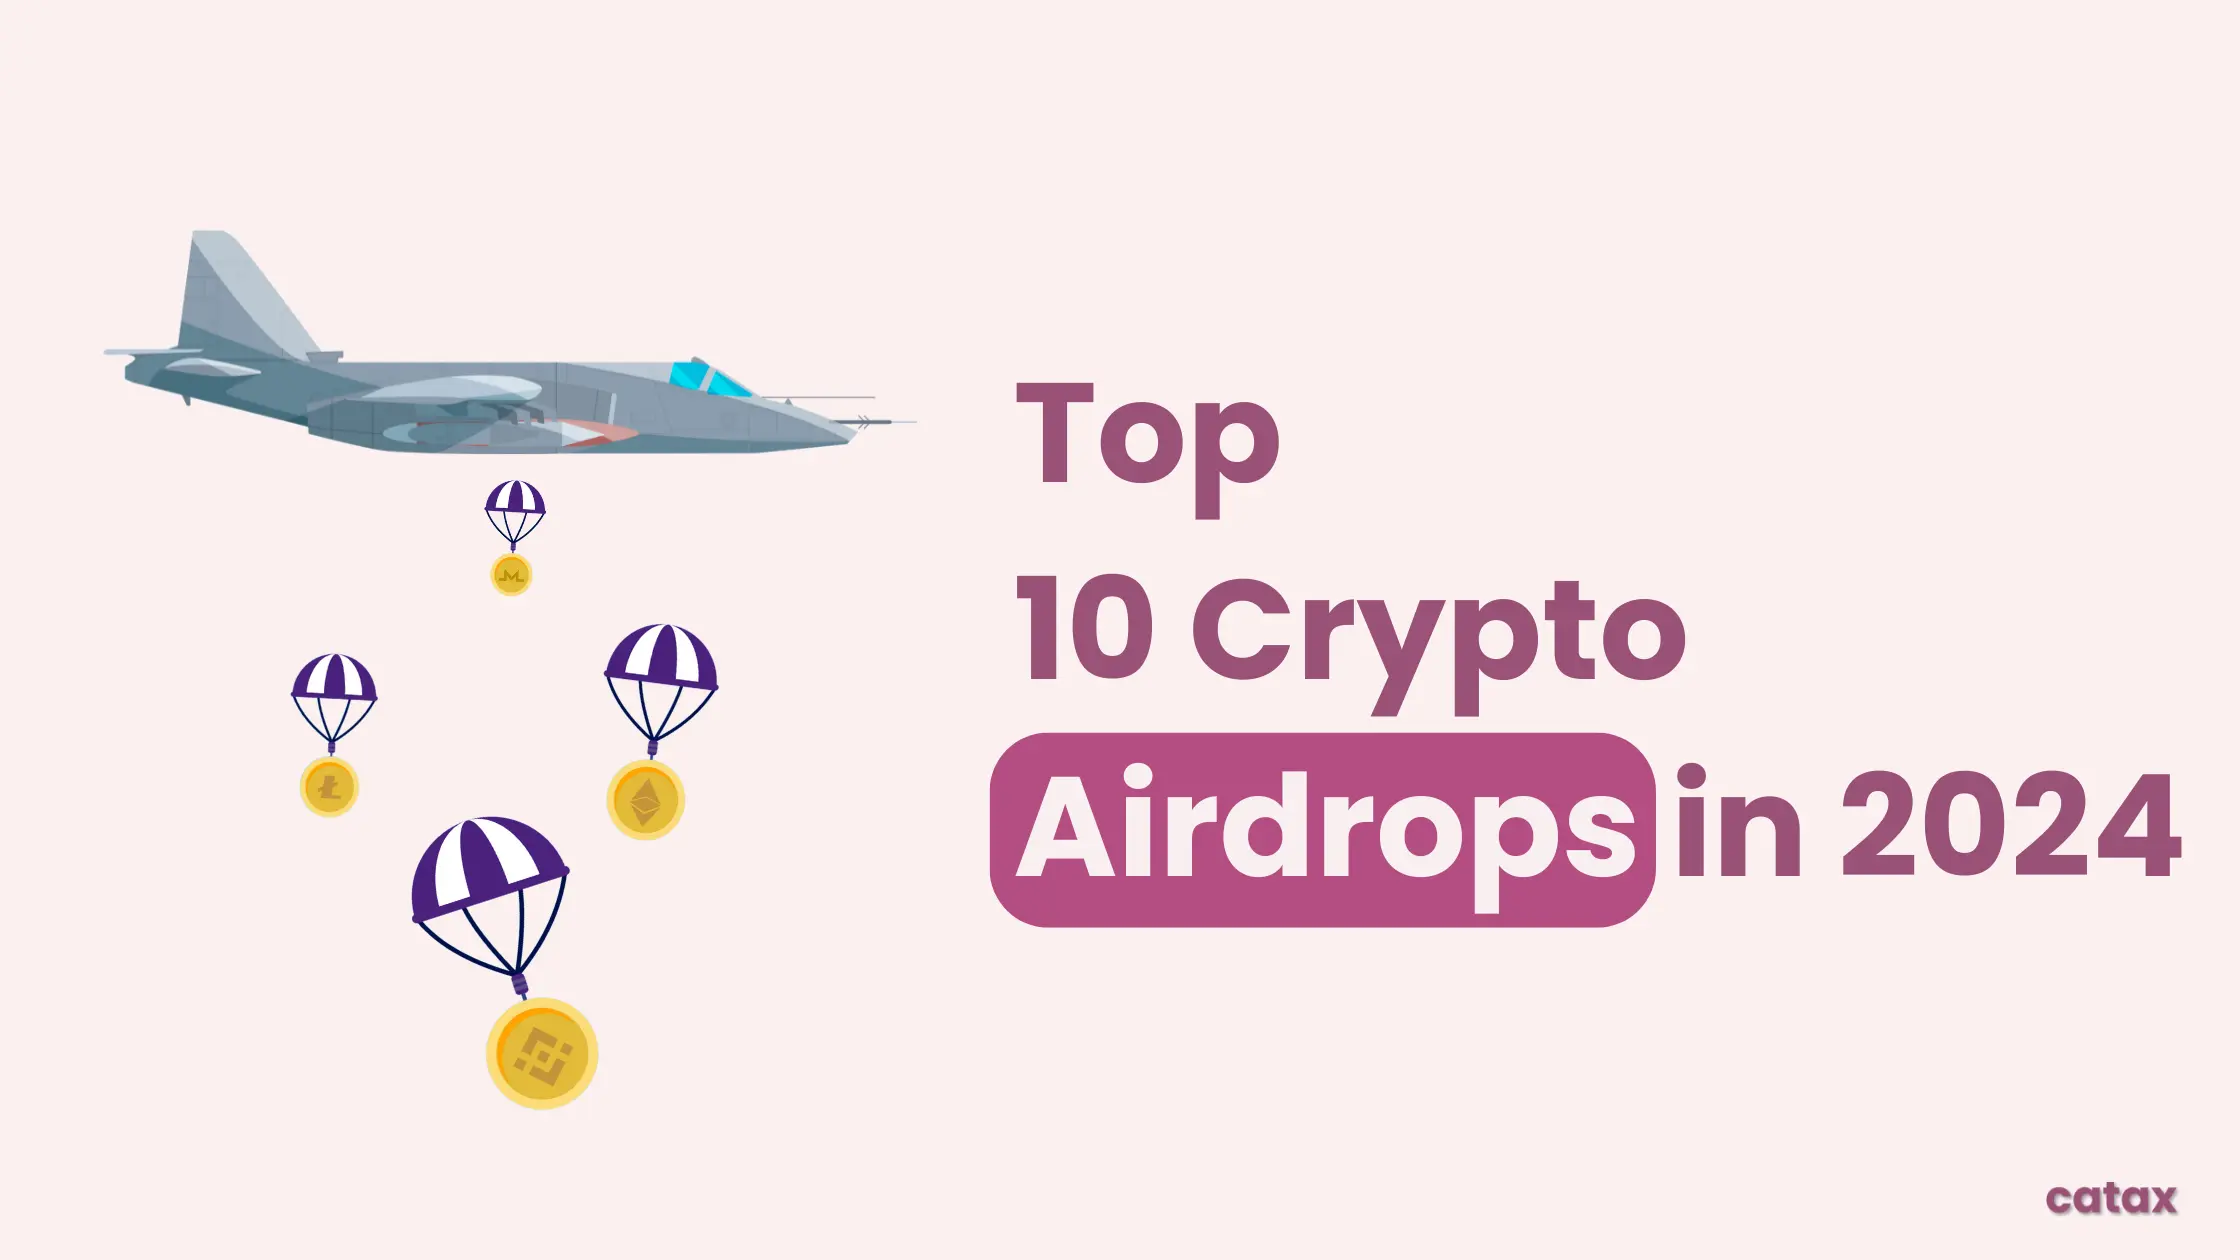 Top 10 Crypto Airdrops in 2024 You Shouldn’t Miss